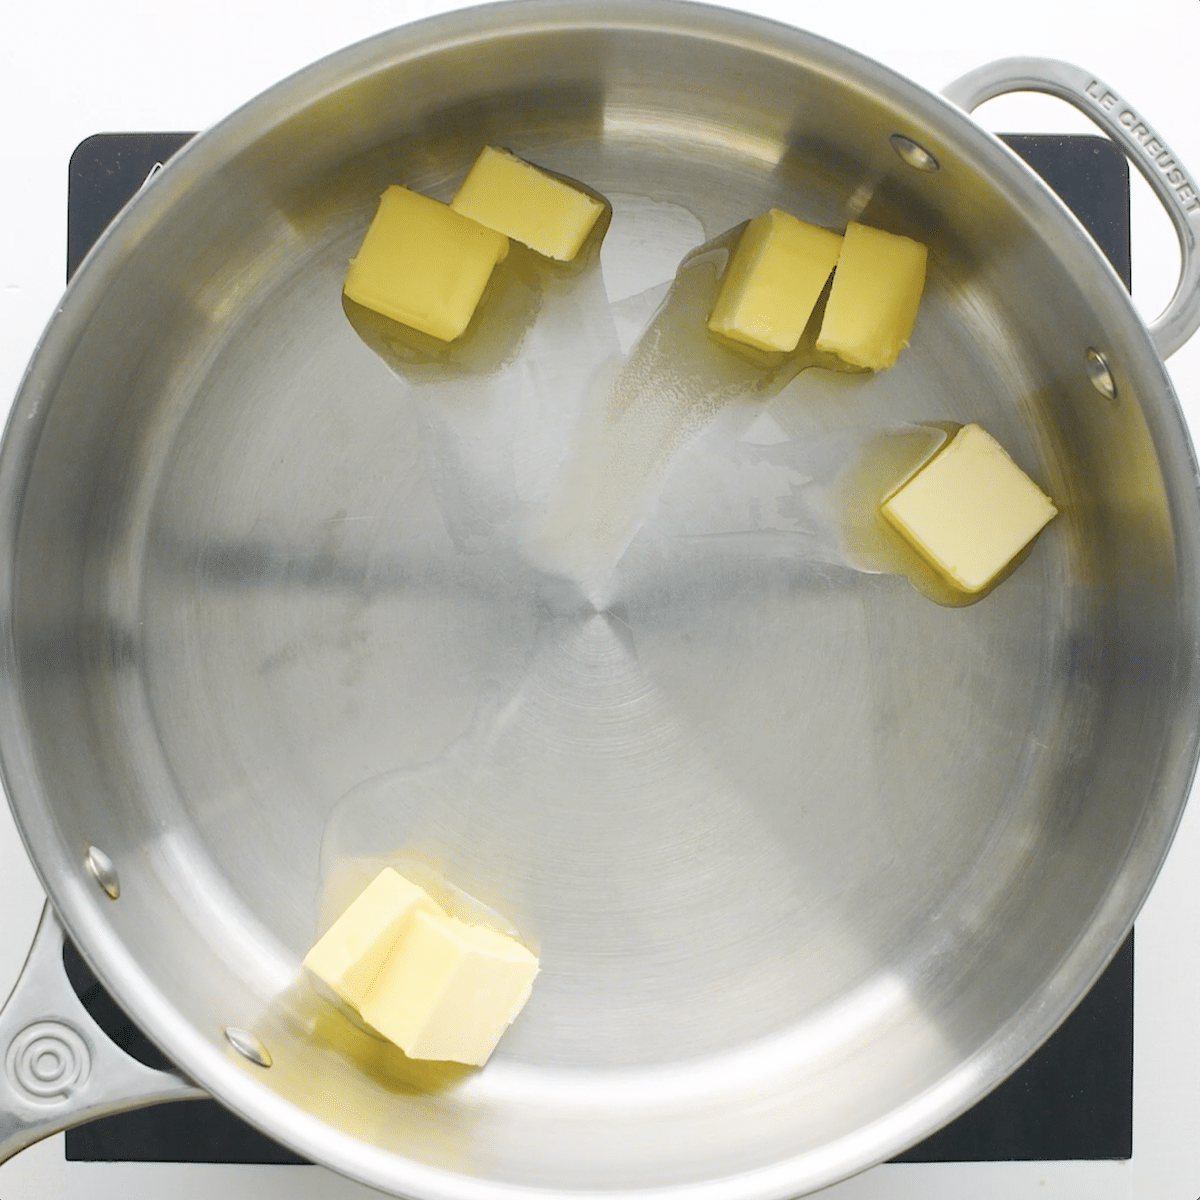 Sauce pan with cubes of butter melting